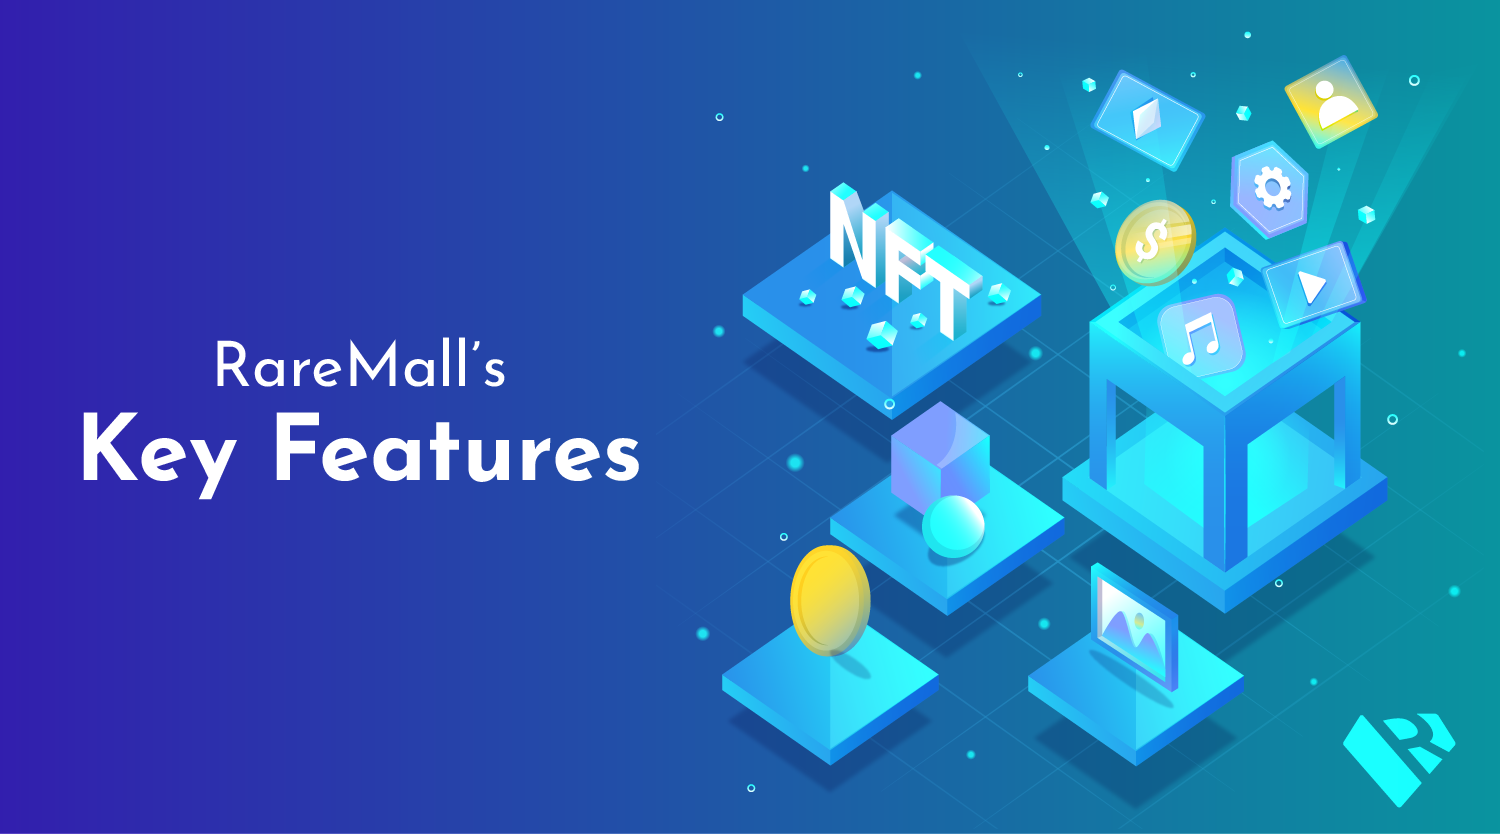 Official Launch of RareMall NFT Marketplace - The Revolutionary Content Creation Platform for Everyone